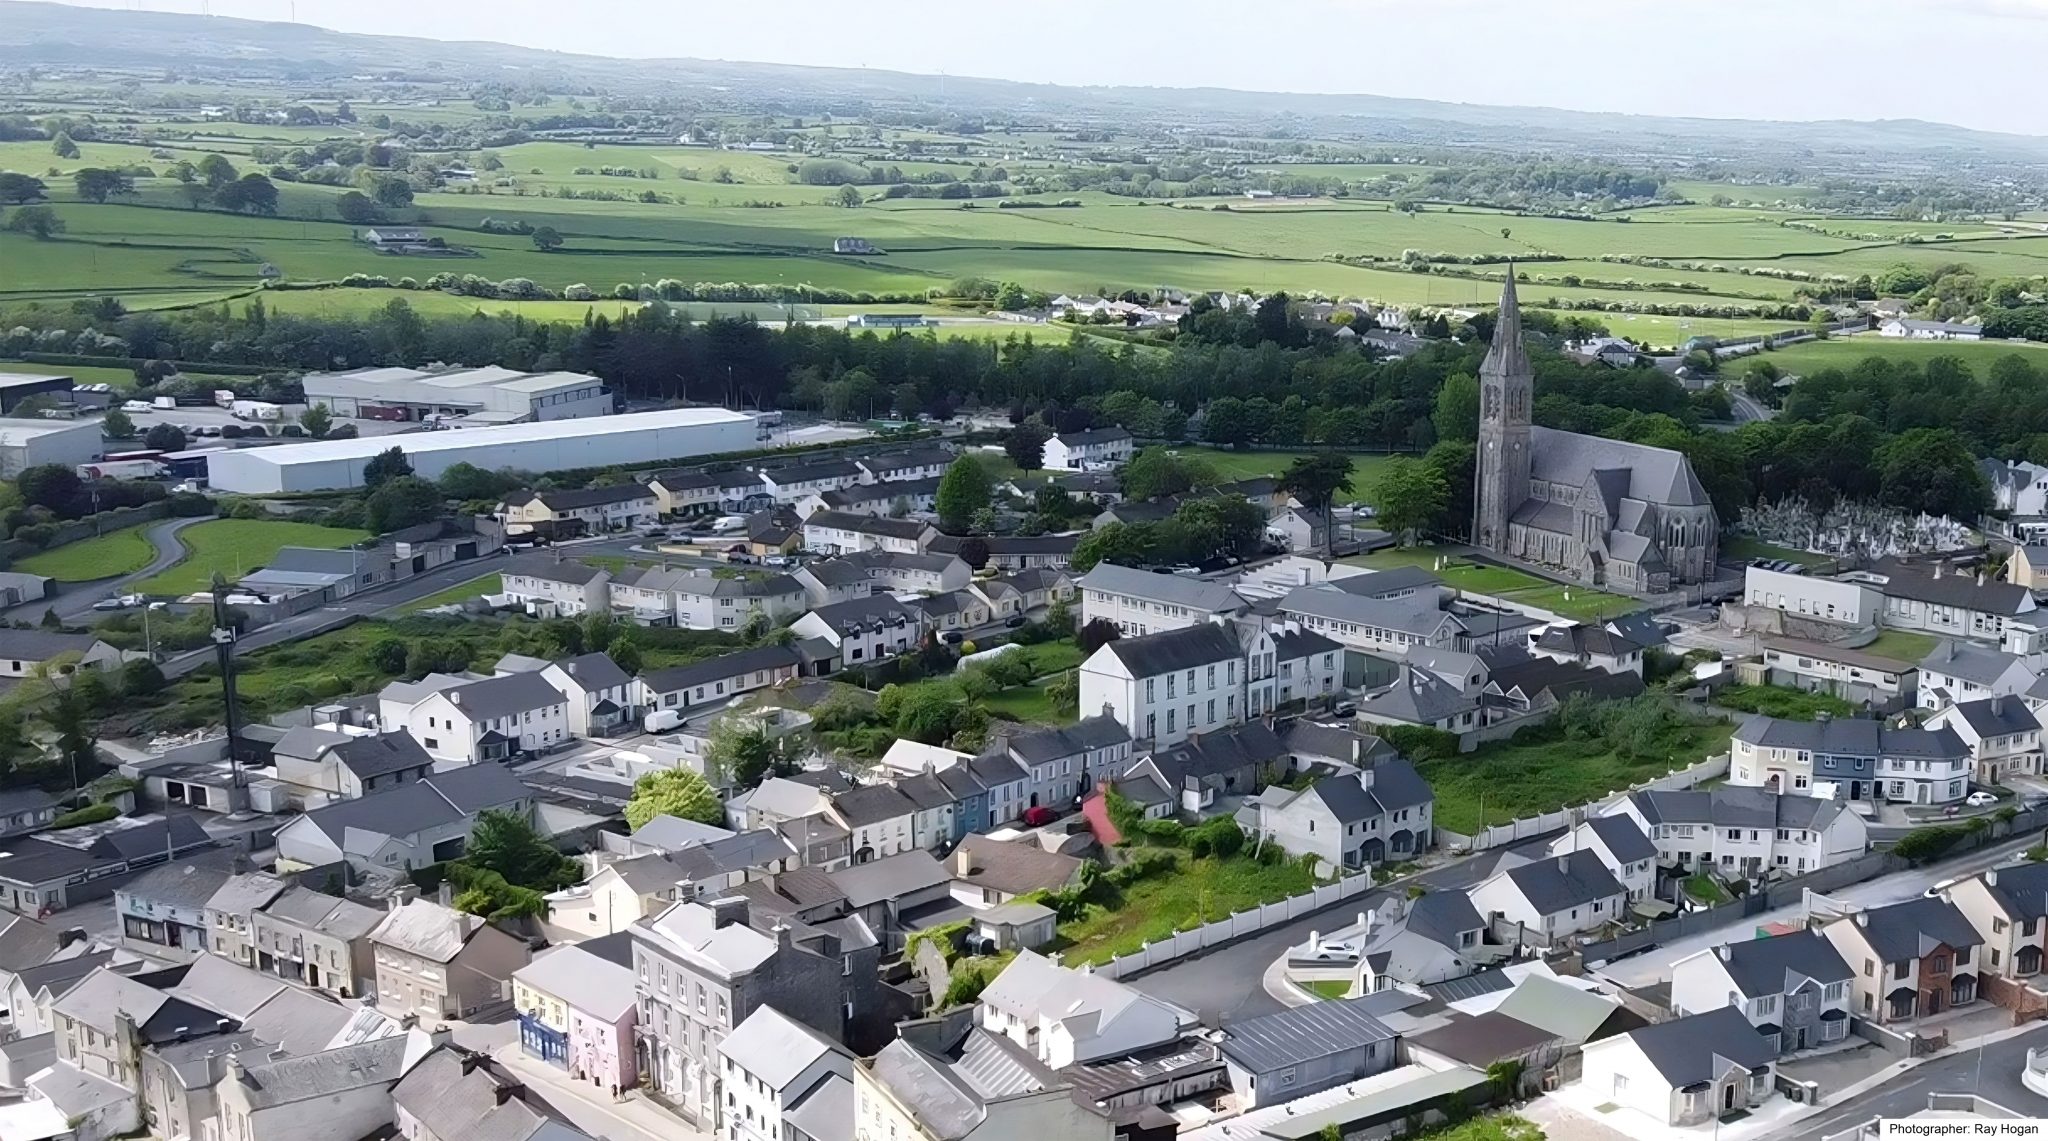 On 30 May 2023 in the Community Centre, Limerick’s Rathkeale Community Council reorganised to help residents rejuvenate their town